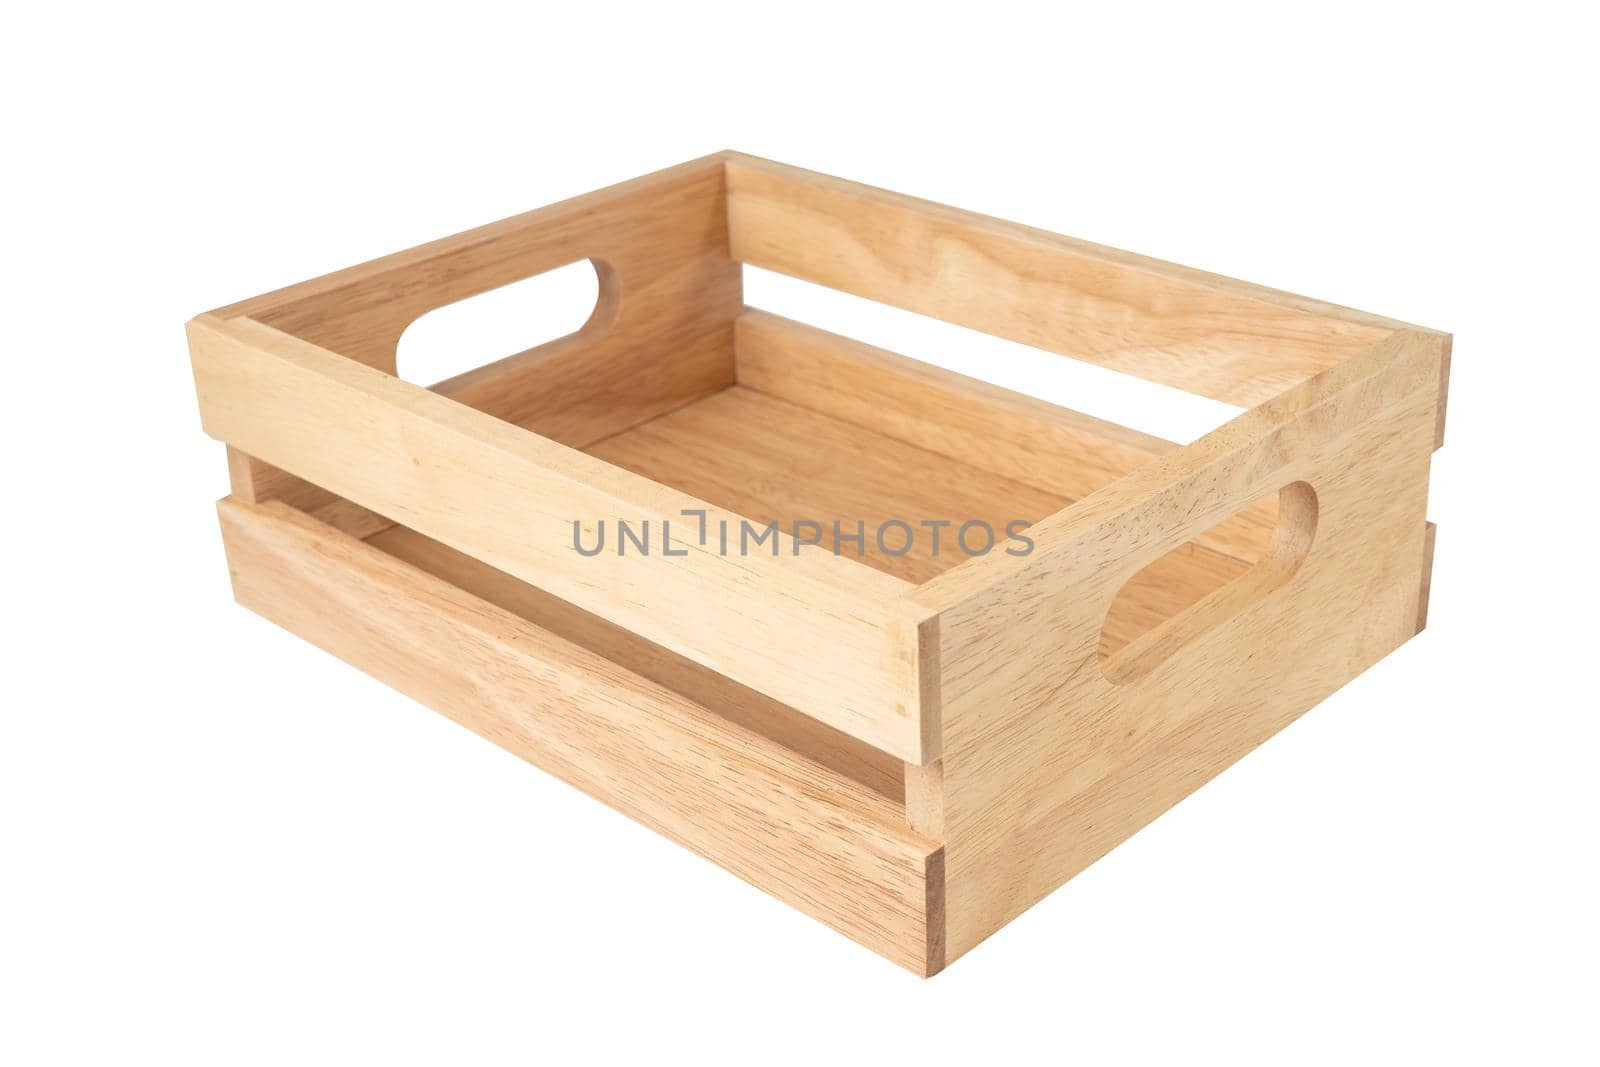 Empty wooden box isolate on white background.